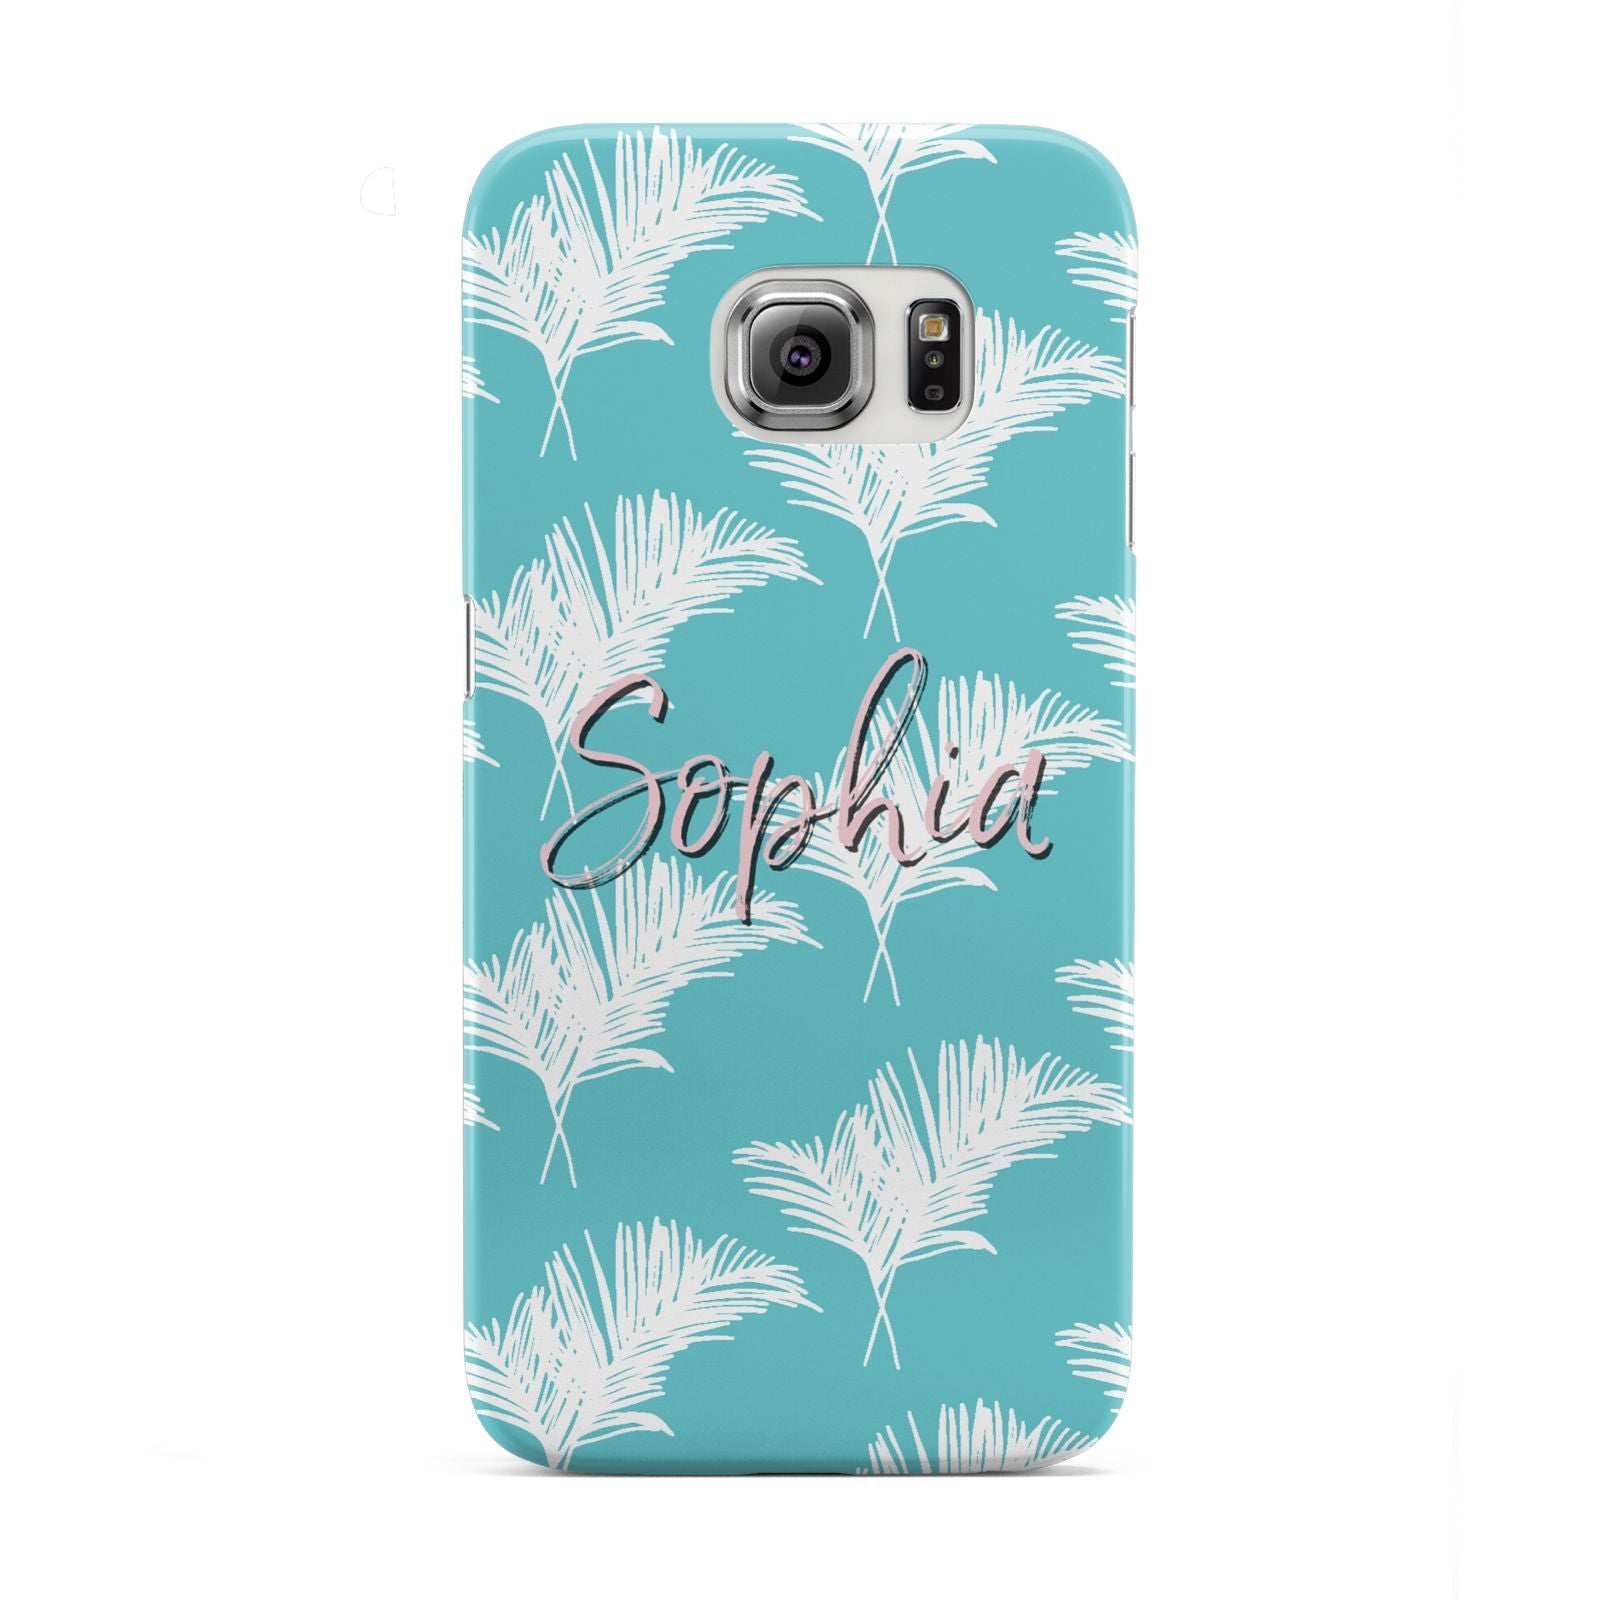 Personalised Blue White Tropical Foliage Samsung Galaxy S6 Edge Case